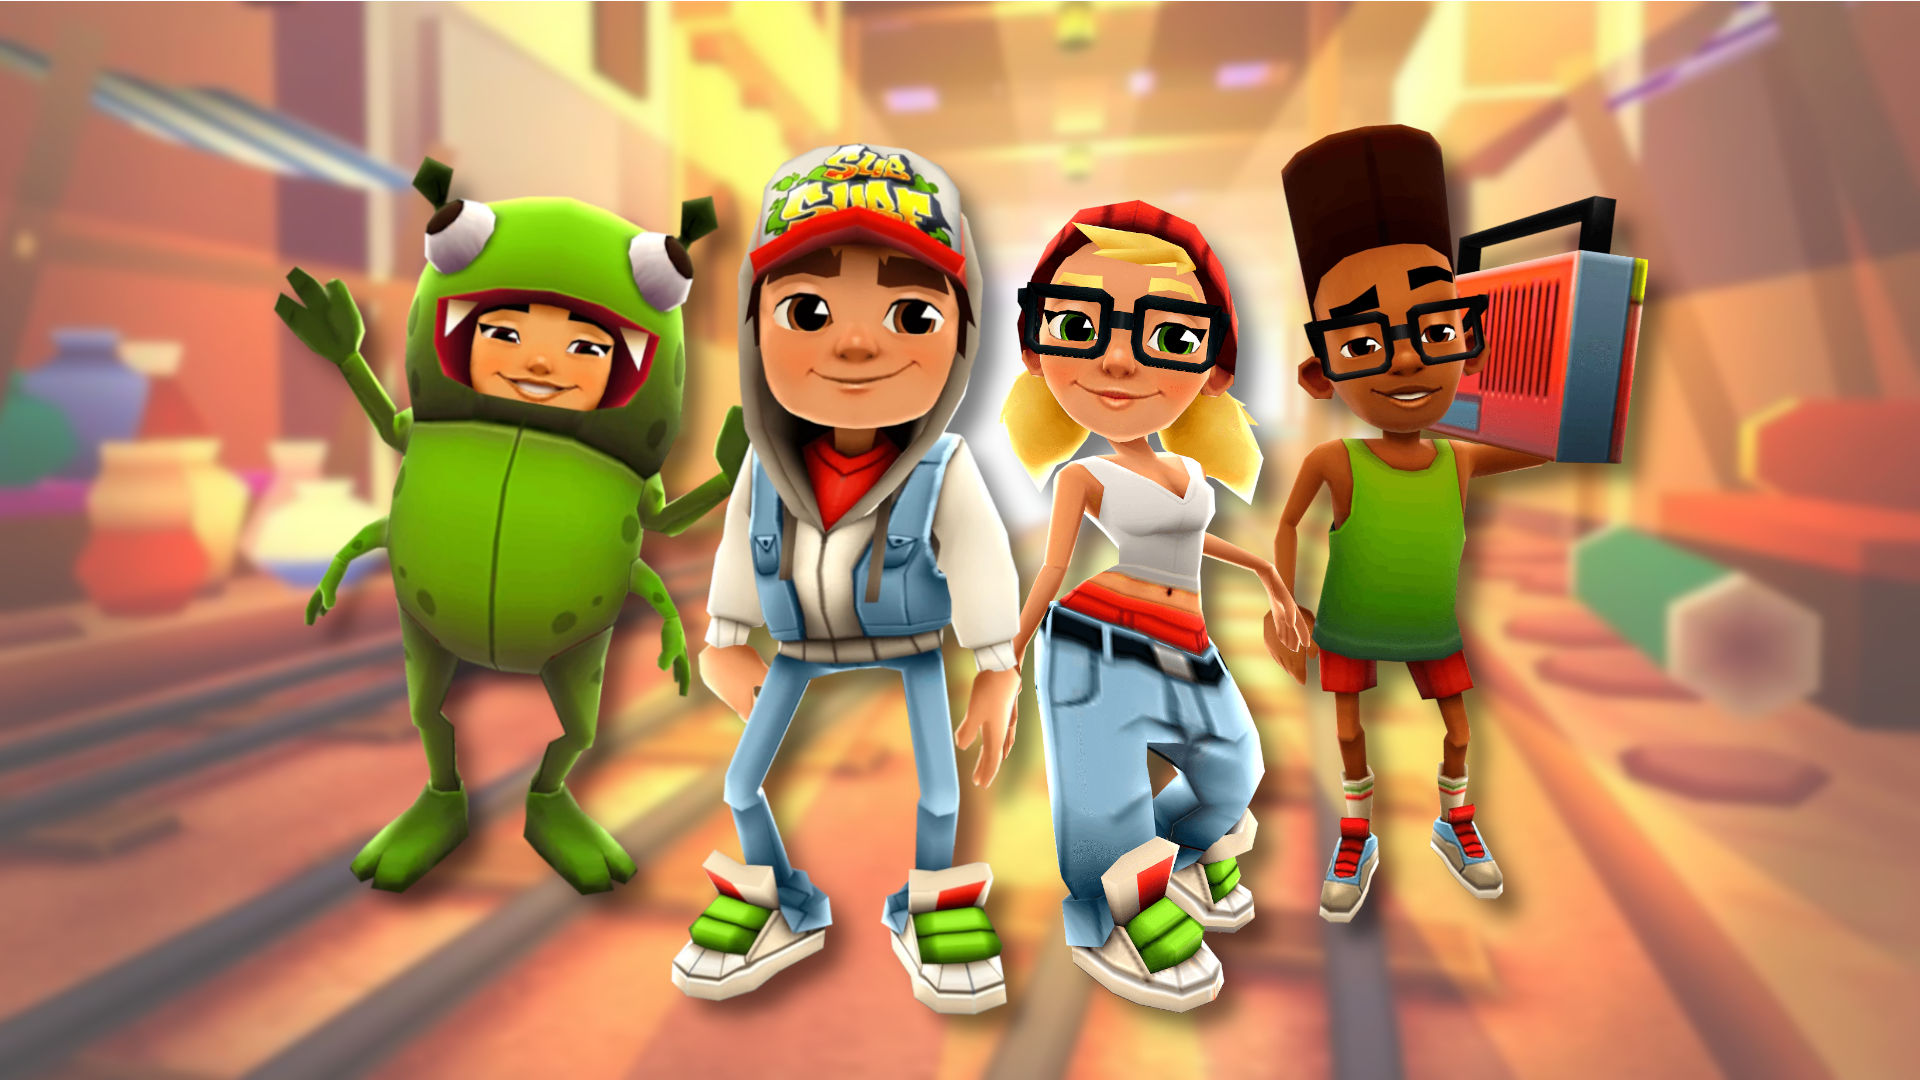 Kiloo Games - The Subway Surfers are travelling to a cool